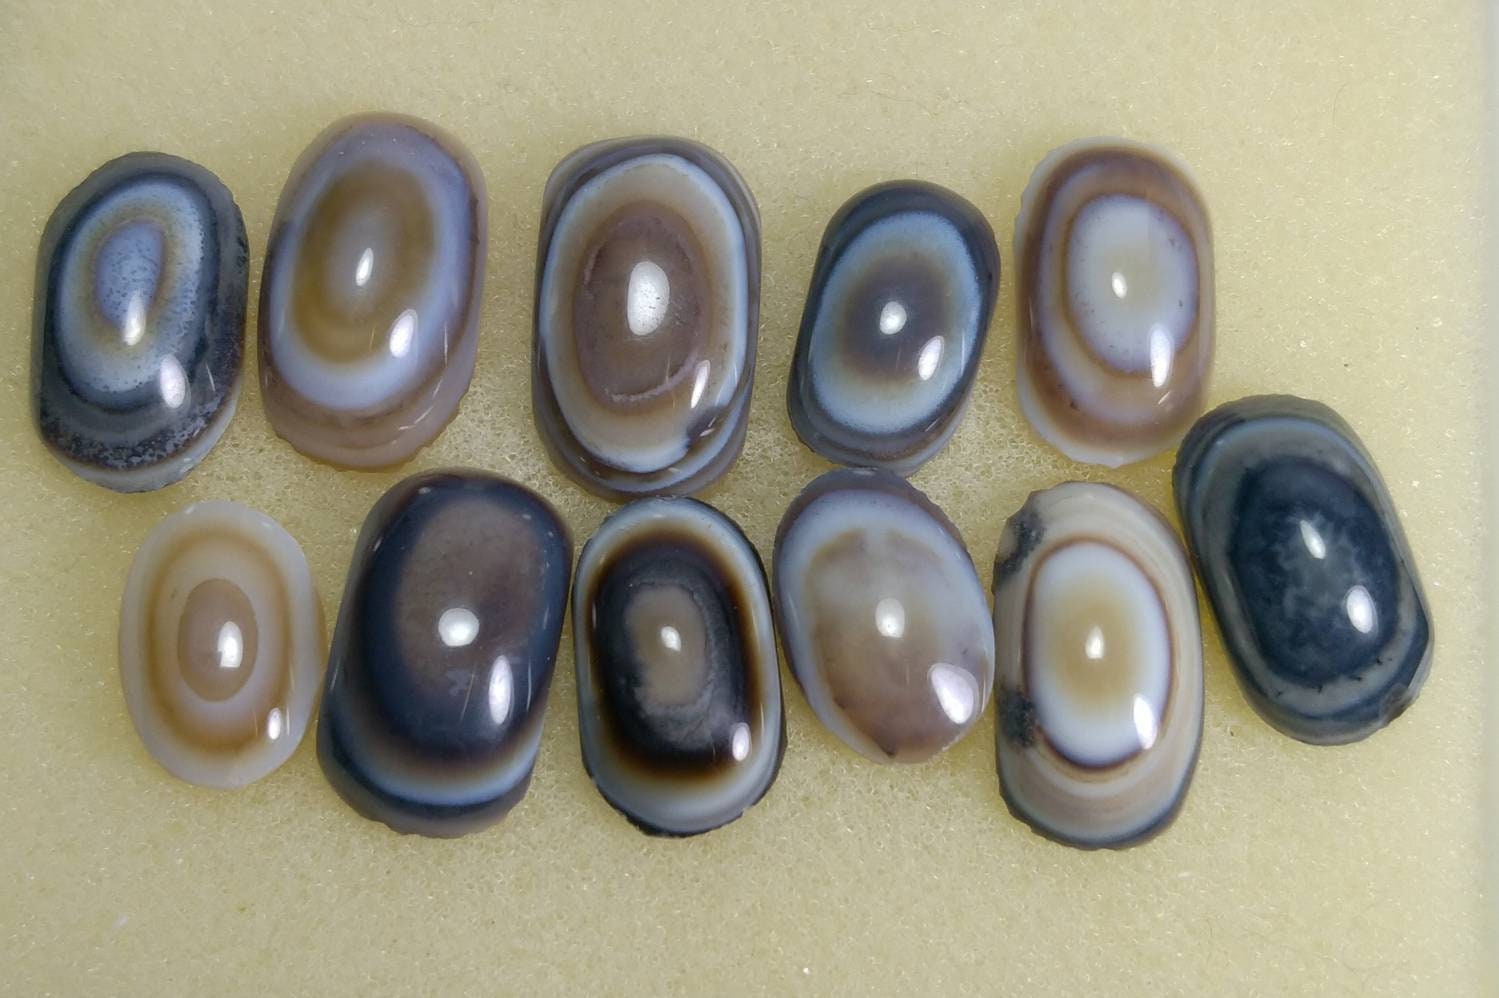 ARSAA GEMS AND MINERALSNatural fine quality beautiful 53 carats small lot of rare banded eye agate Cabochons - Premium  from ARSAA GEMS AND MINERALS - Just $40.00! Shop now at ARSAA GEMS AND MINERALS